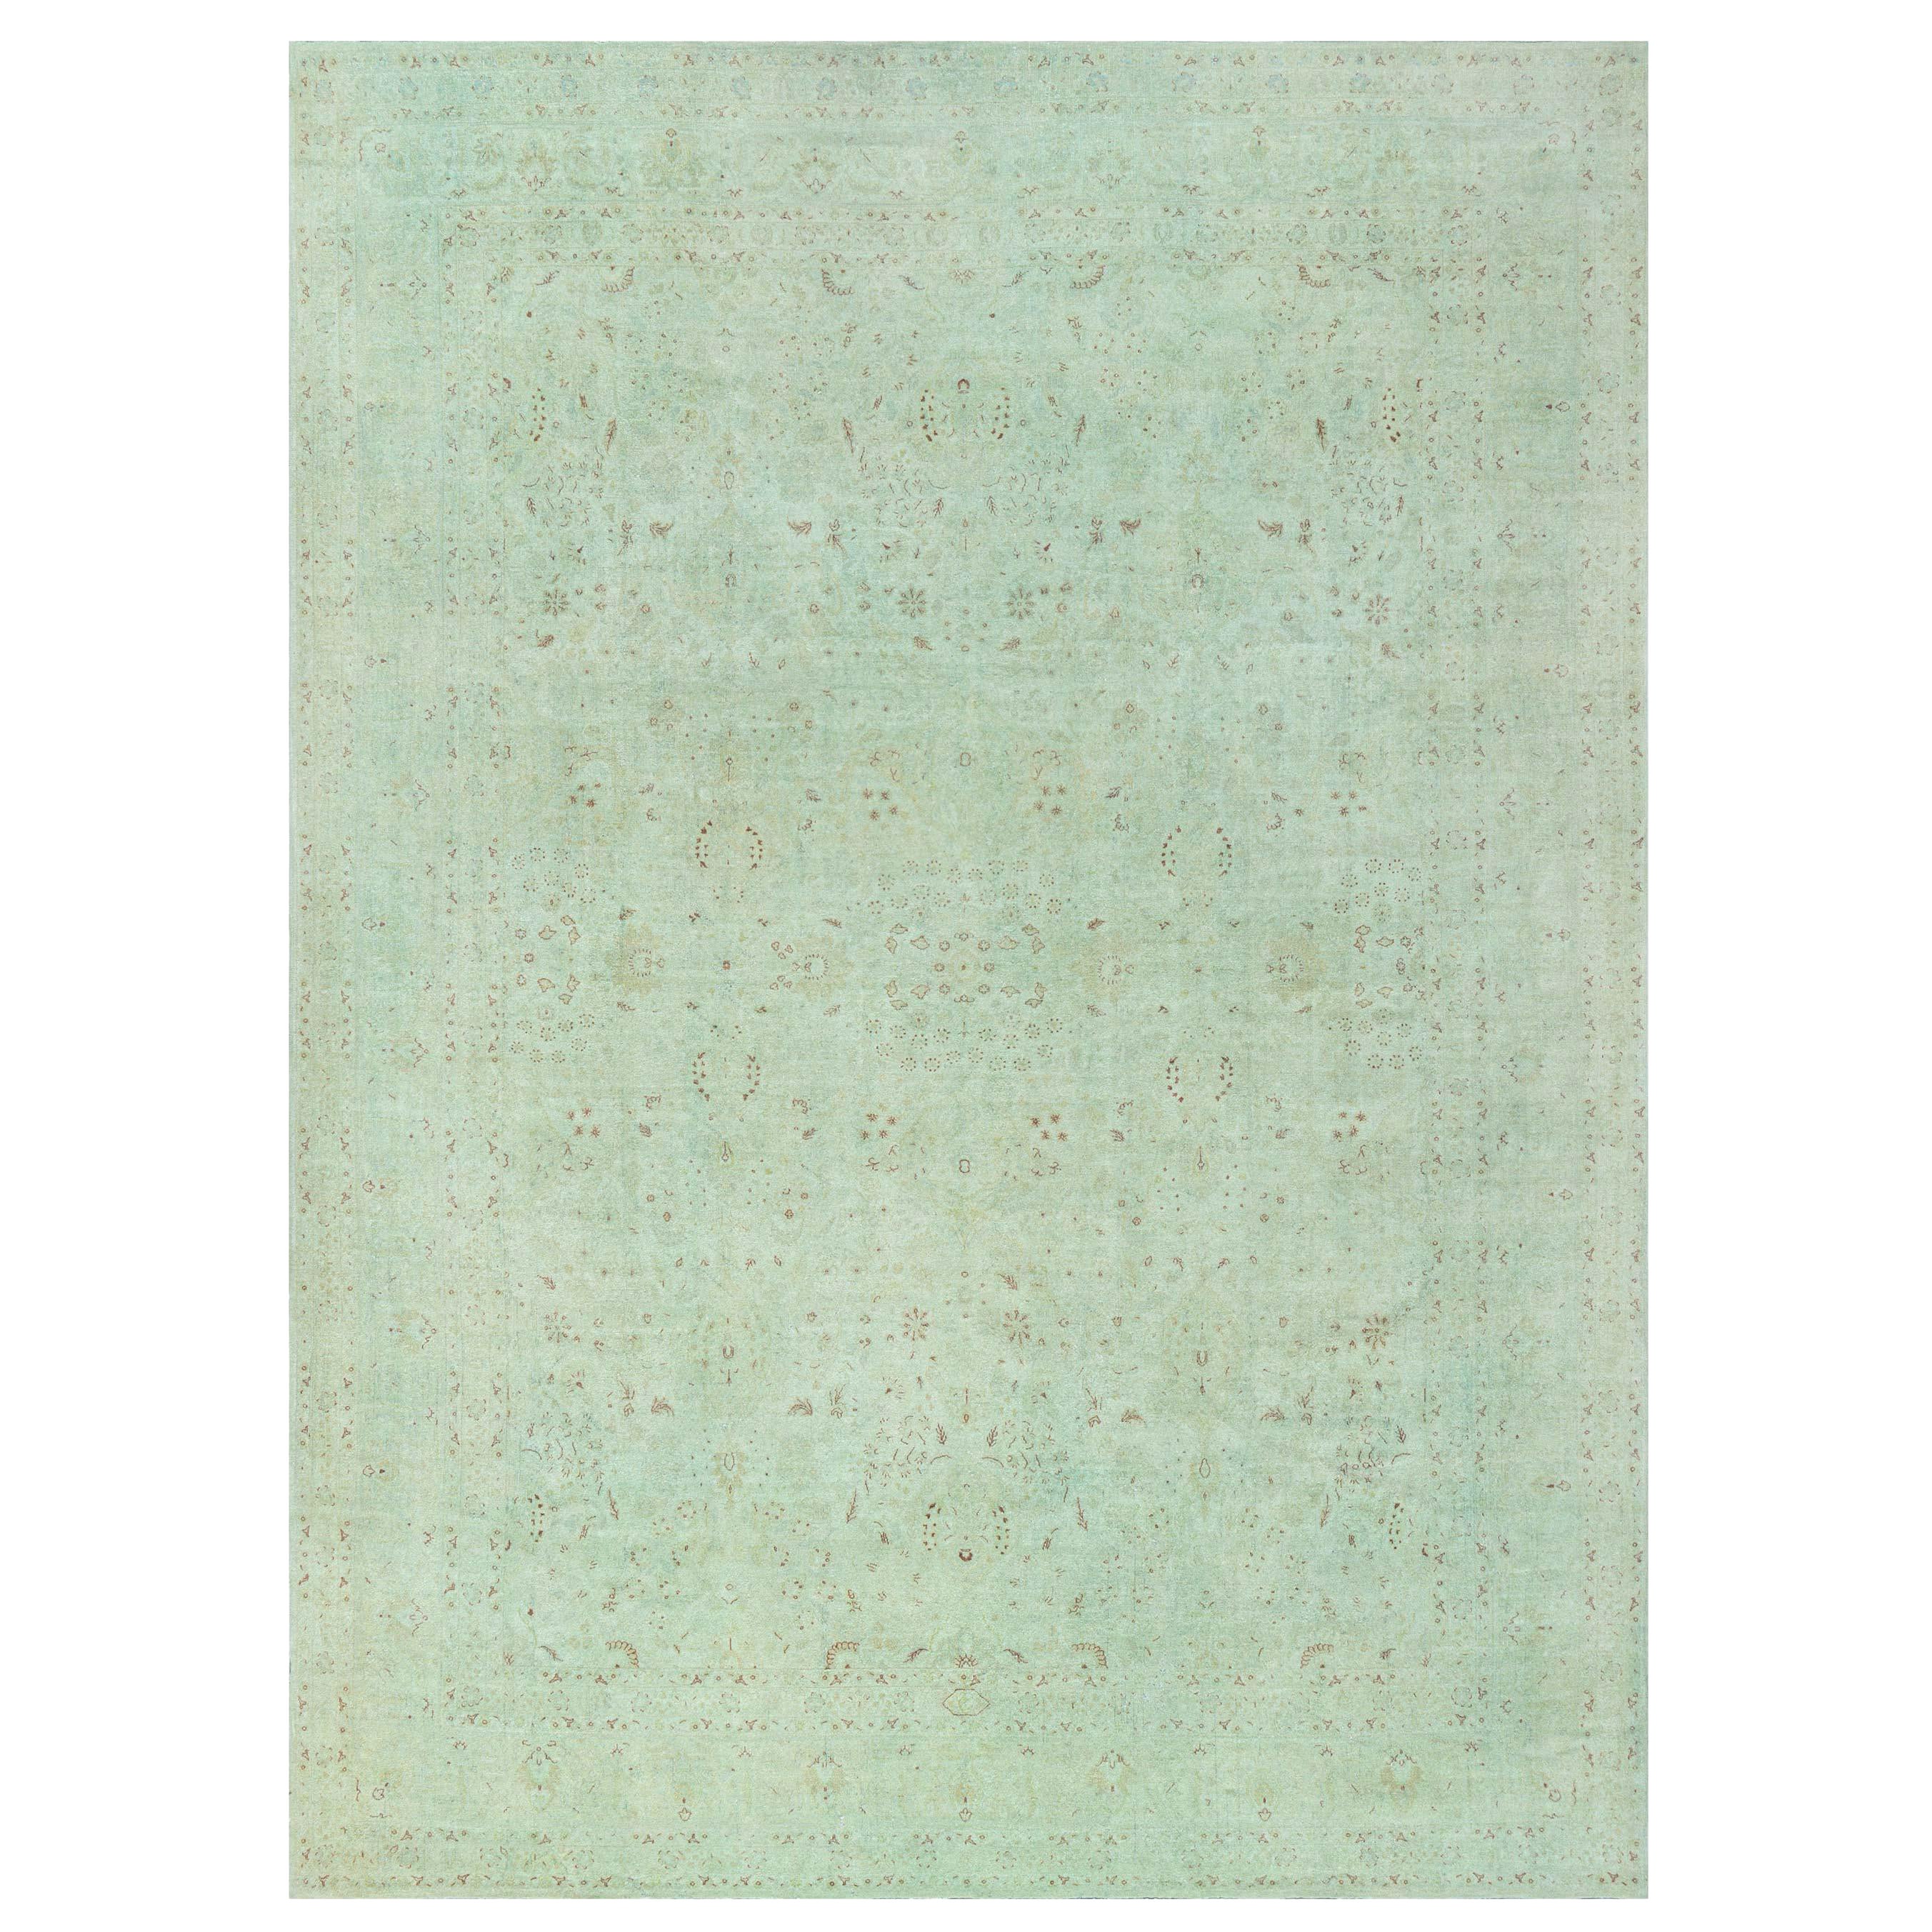 Traditional Inspired Hand Knotted Wool Rug by Doris Leslie Blau